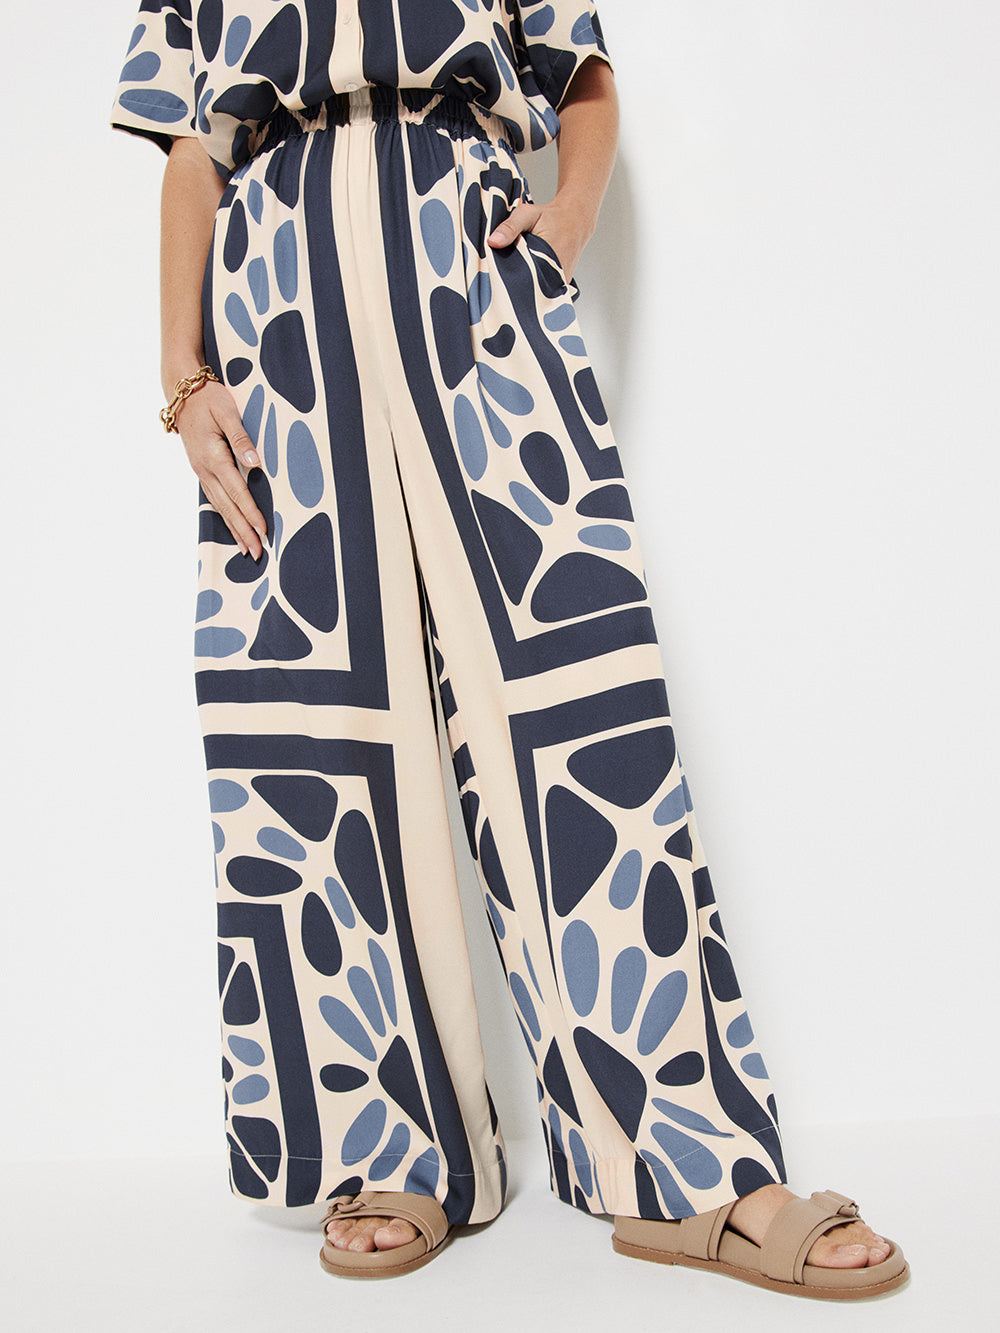 The Silky Print Pant